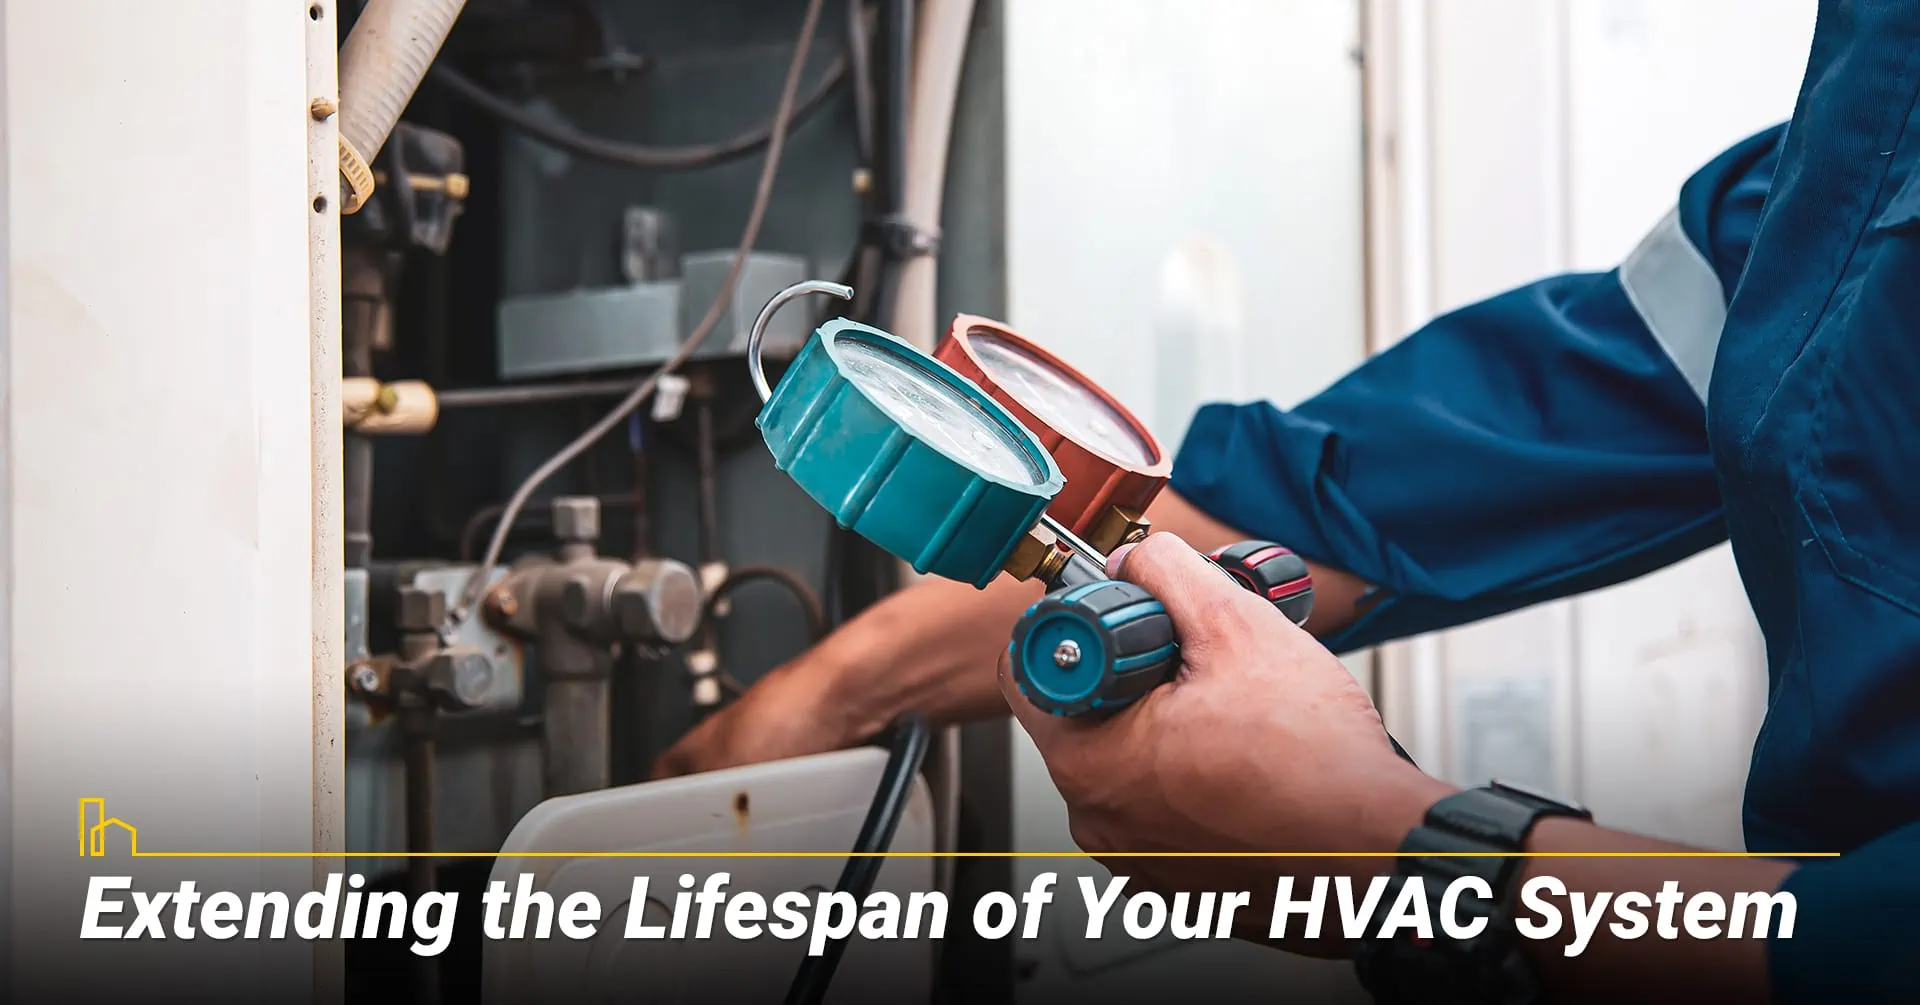 3. Extending the Lifespan of Your HVAC System